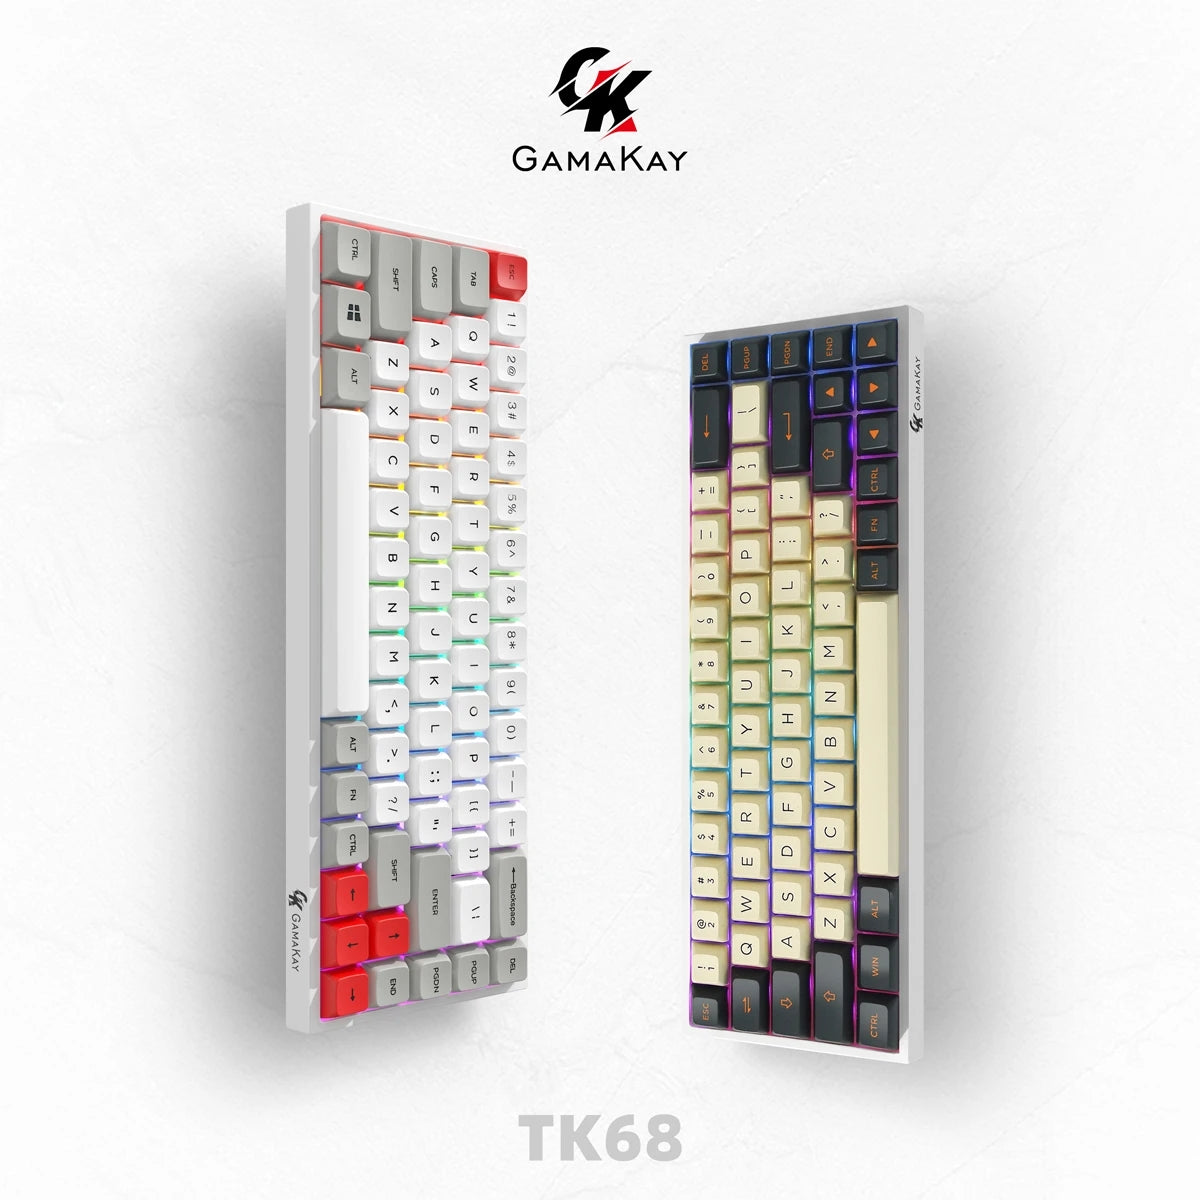 Discover the ultimate gaming experience with the Gamakay TK68, a compact 65% mechanical keyboard that offers performance, style, and convenience in one sleek package. Whether you're a gamer, a typist, or simply someone who appreciates a high-quality typing experience, the TK68 has the features you need to level up your productivity and gameplay.